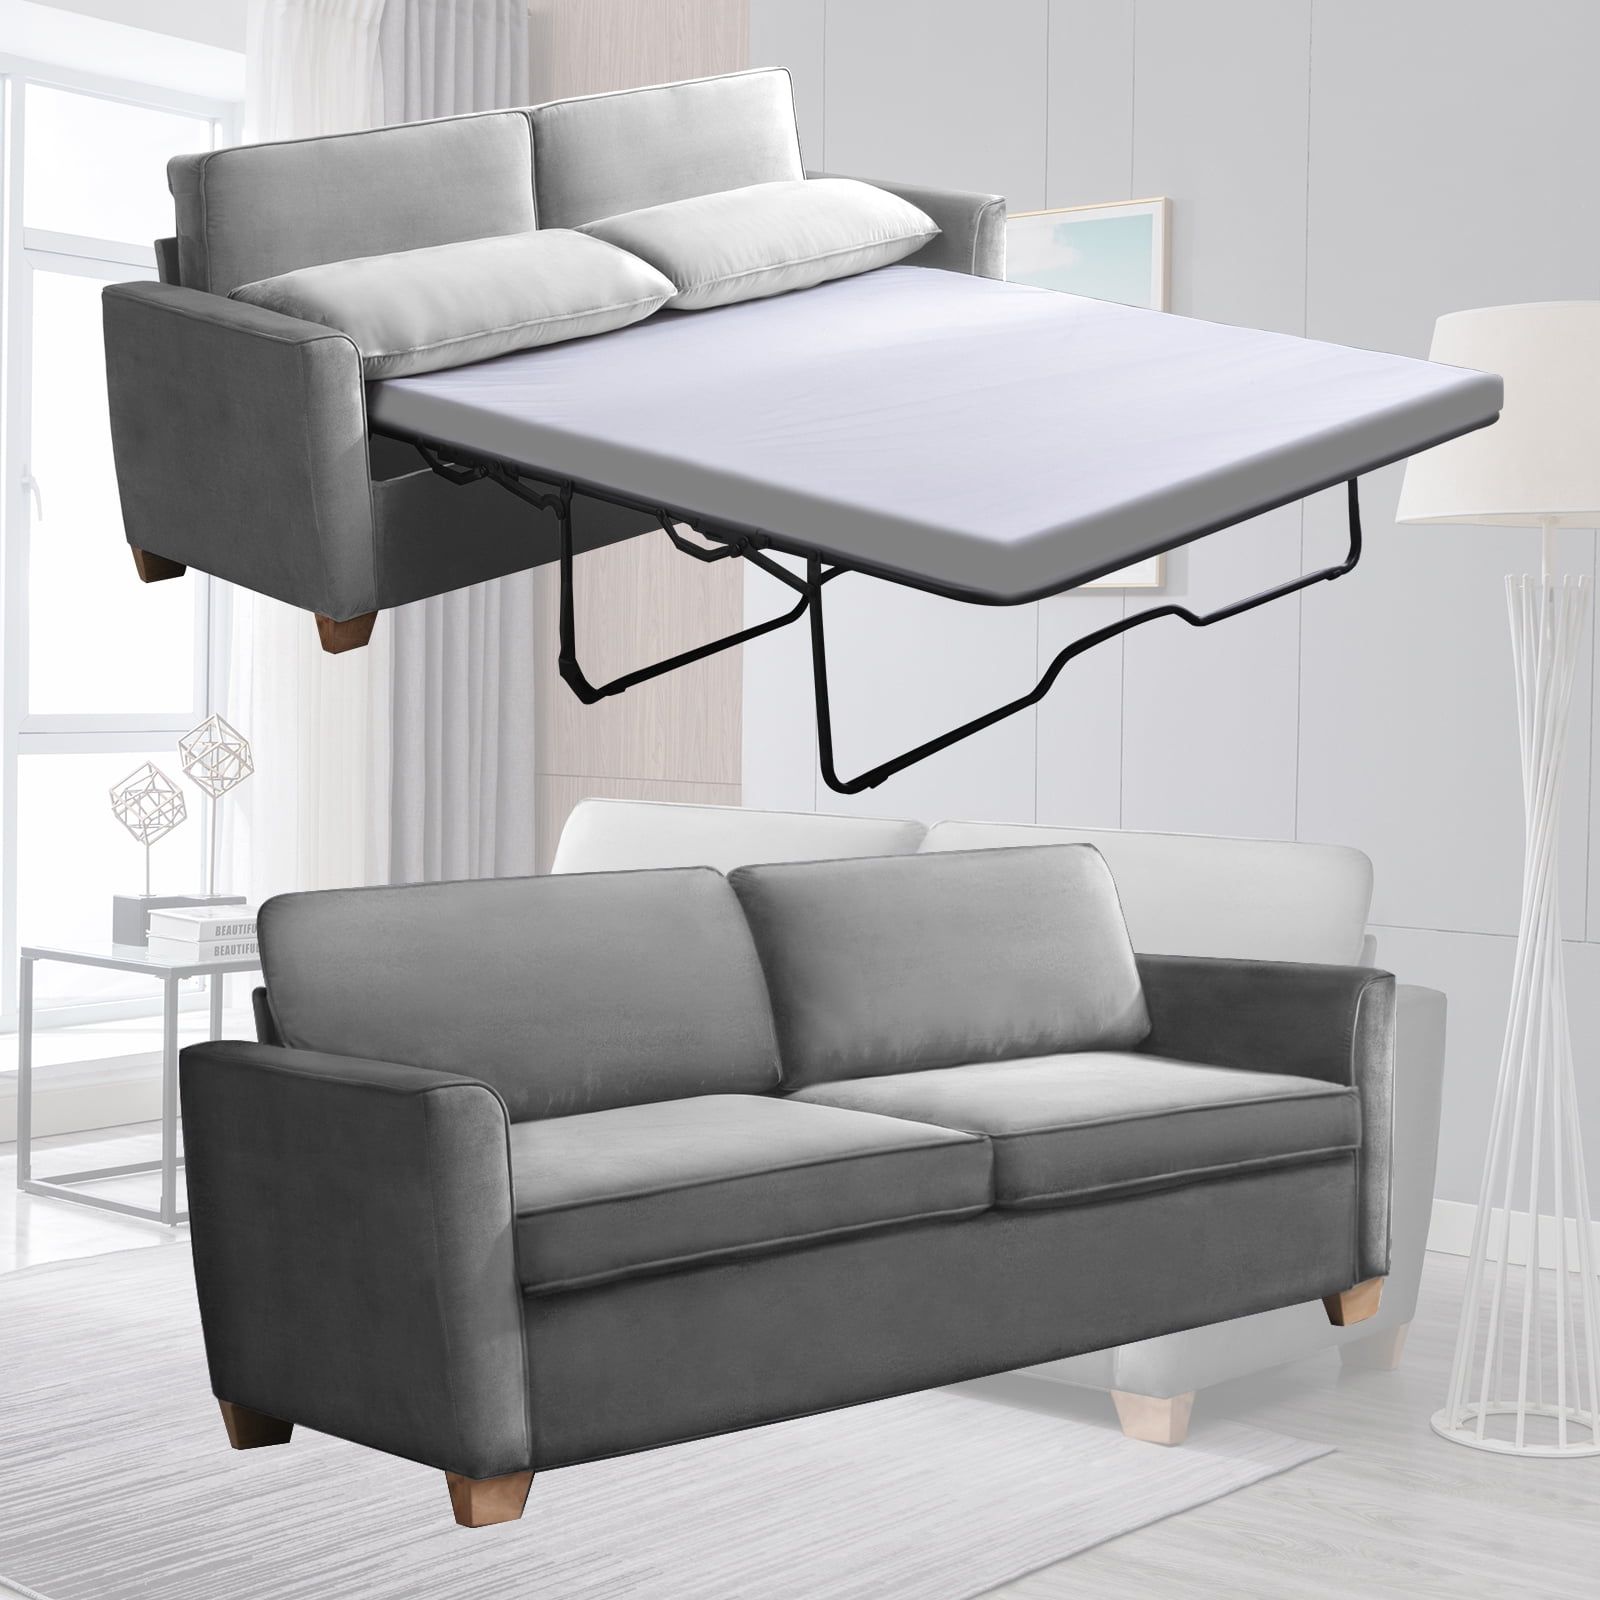 Mixoy 2 In 1 Pull Out Sofa Bed, Velvet Loveseat Sleeper Sofa Bed With  Folding Mattress, Pull Out Couch Bed Suitable For Living Room, Full Size Sofa  Sleeper For Apartment/small Spaces (queen,grey) – Walmart For 2 In 1 Gray Pull Out Sofa Beds (View 2 of 15)